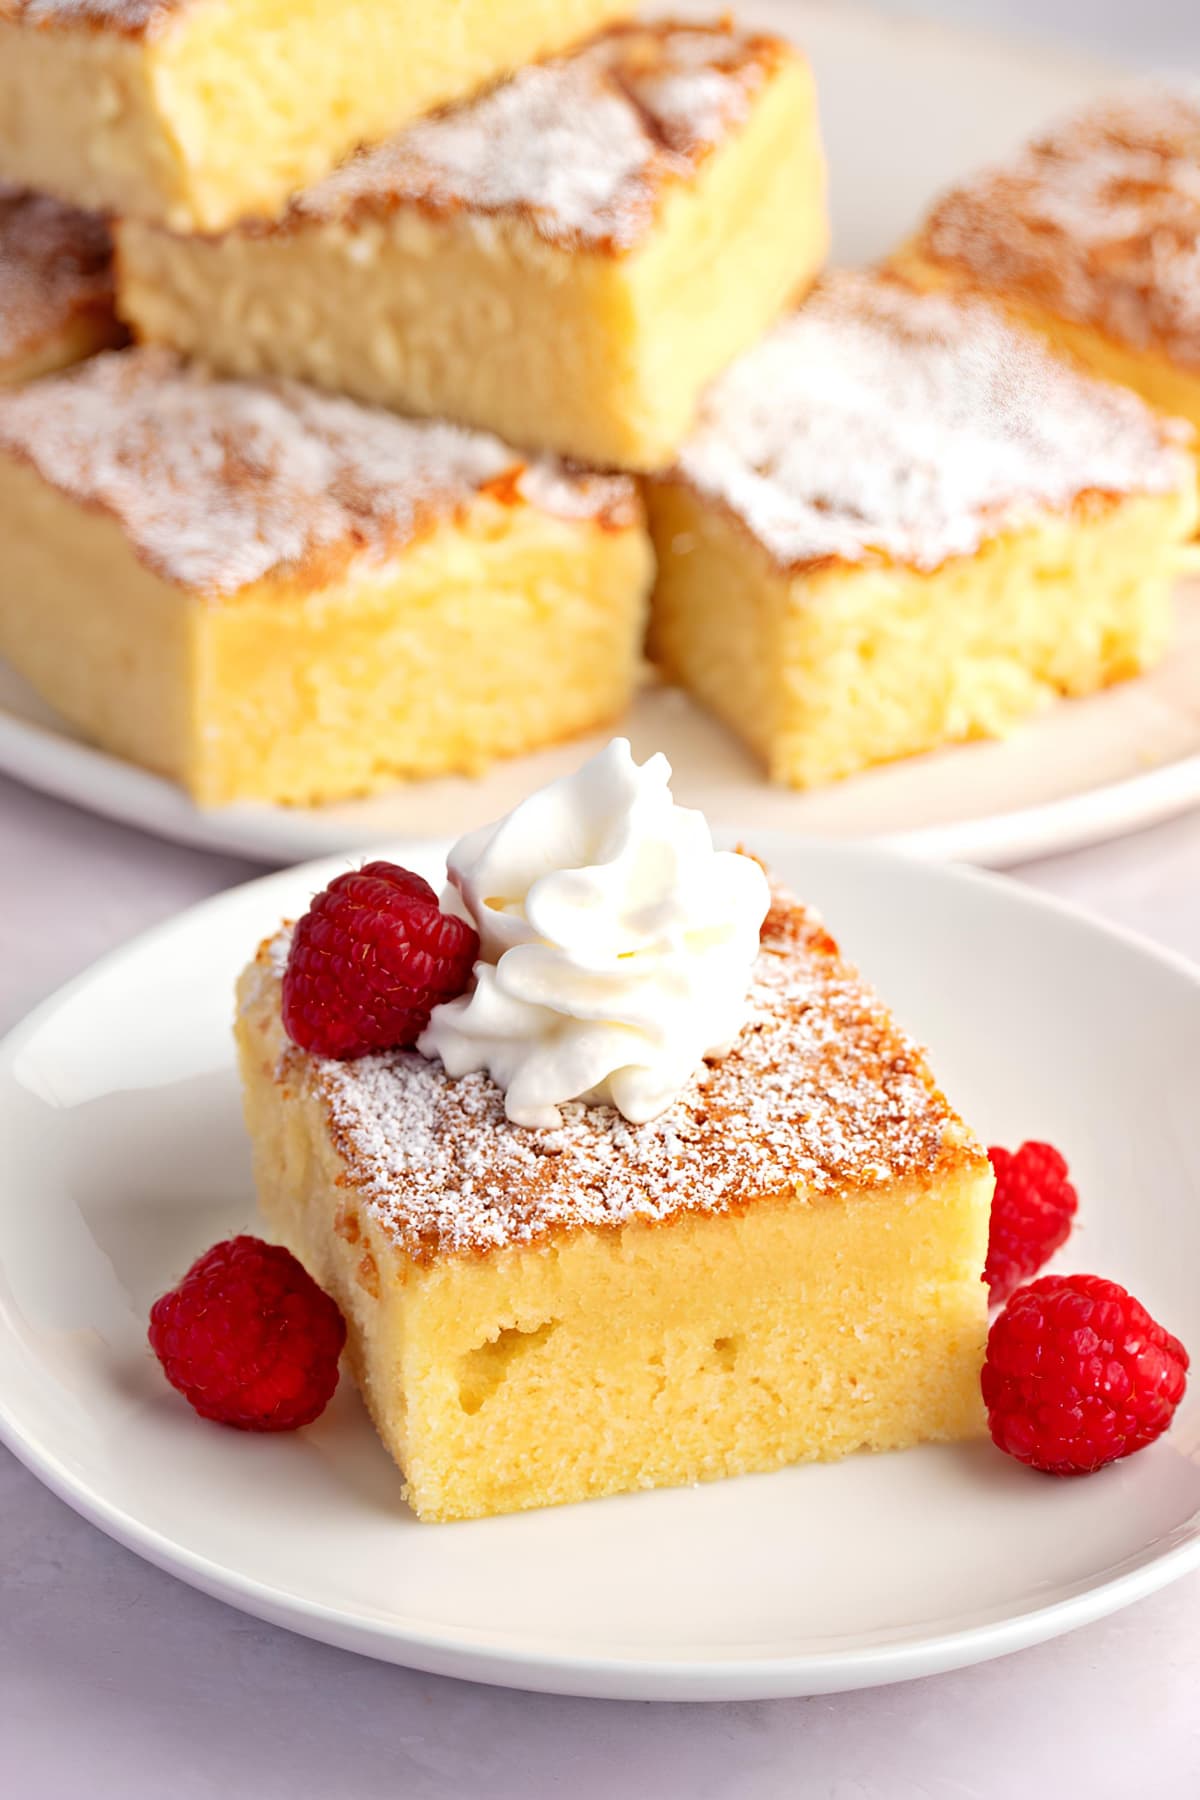 Old-Fashioned Hot Milk Cake Recipe: A slice of hot milk cake topped with whipped cream and garnished with fresh raspberries.